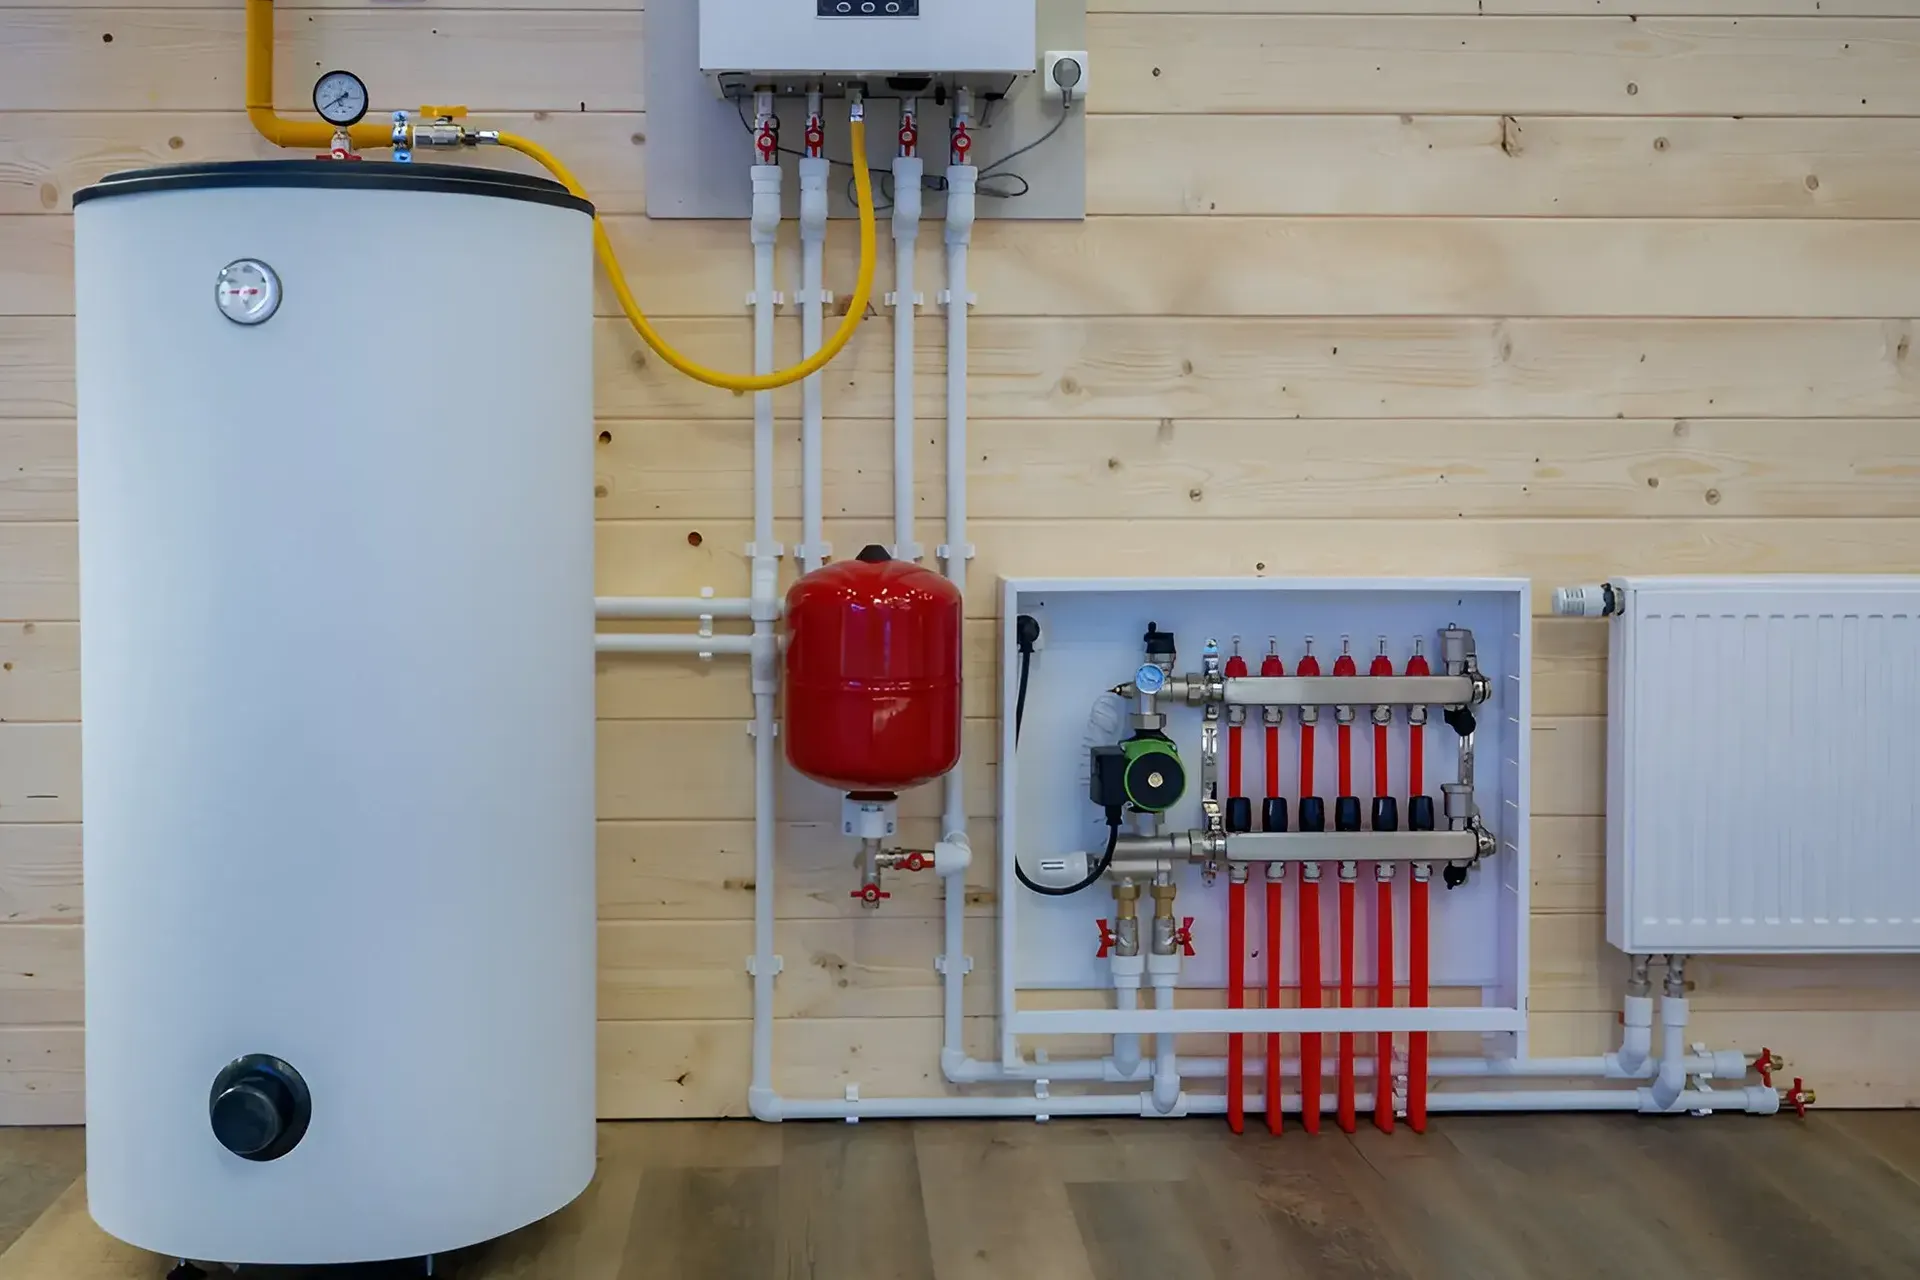 Our water heater installation and repair service are designed to ensure that you have reliable and efficient access to hot water in your home or business. From initial installation to emergency repairs, our team of experts is here to meet all your water heater-related needs.